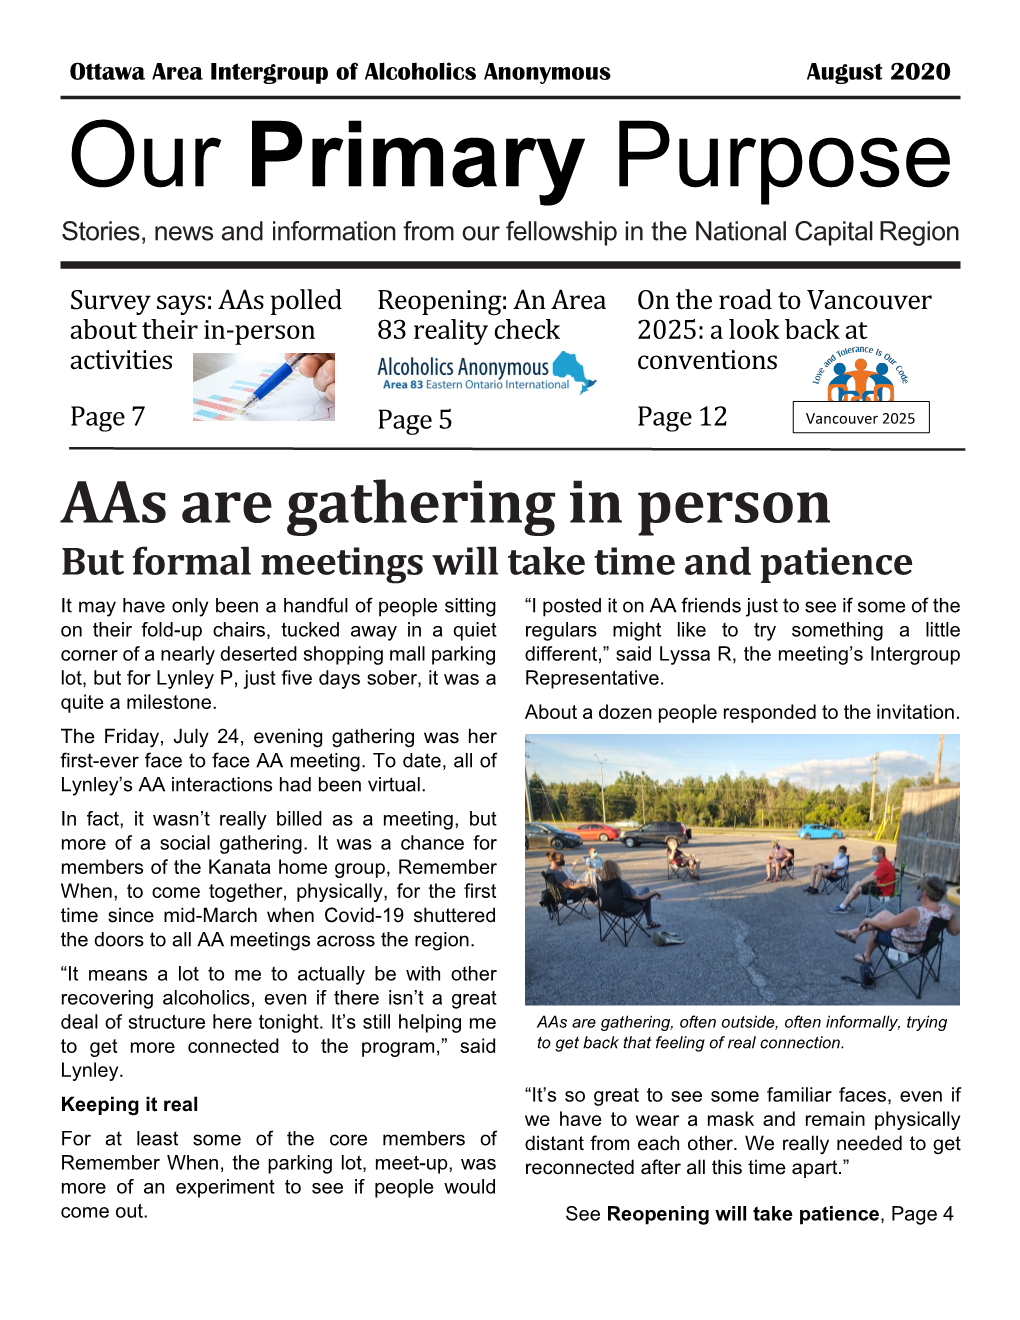 Our Primary Purpose Stories, News and Information from Our Fellowship in the National Capital Region